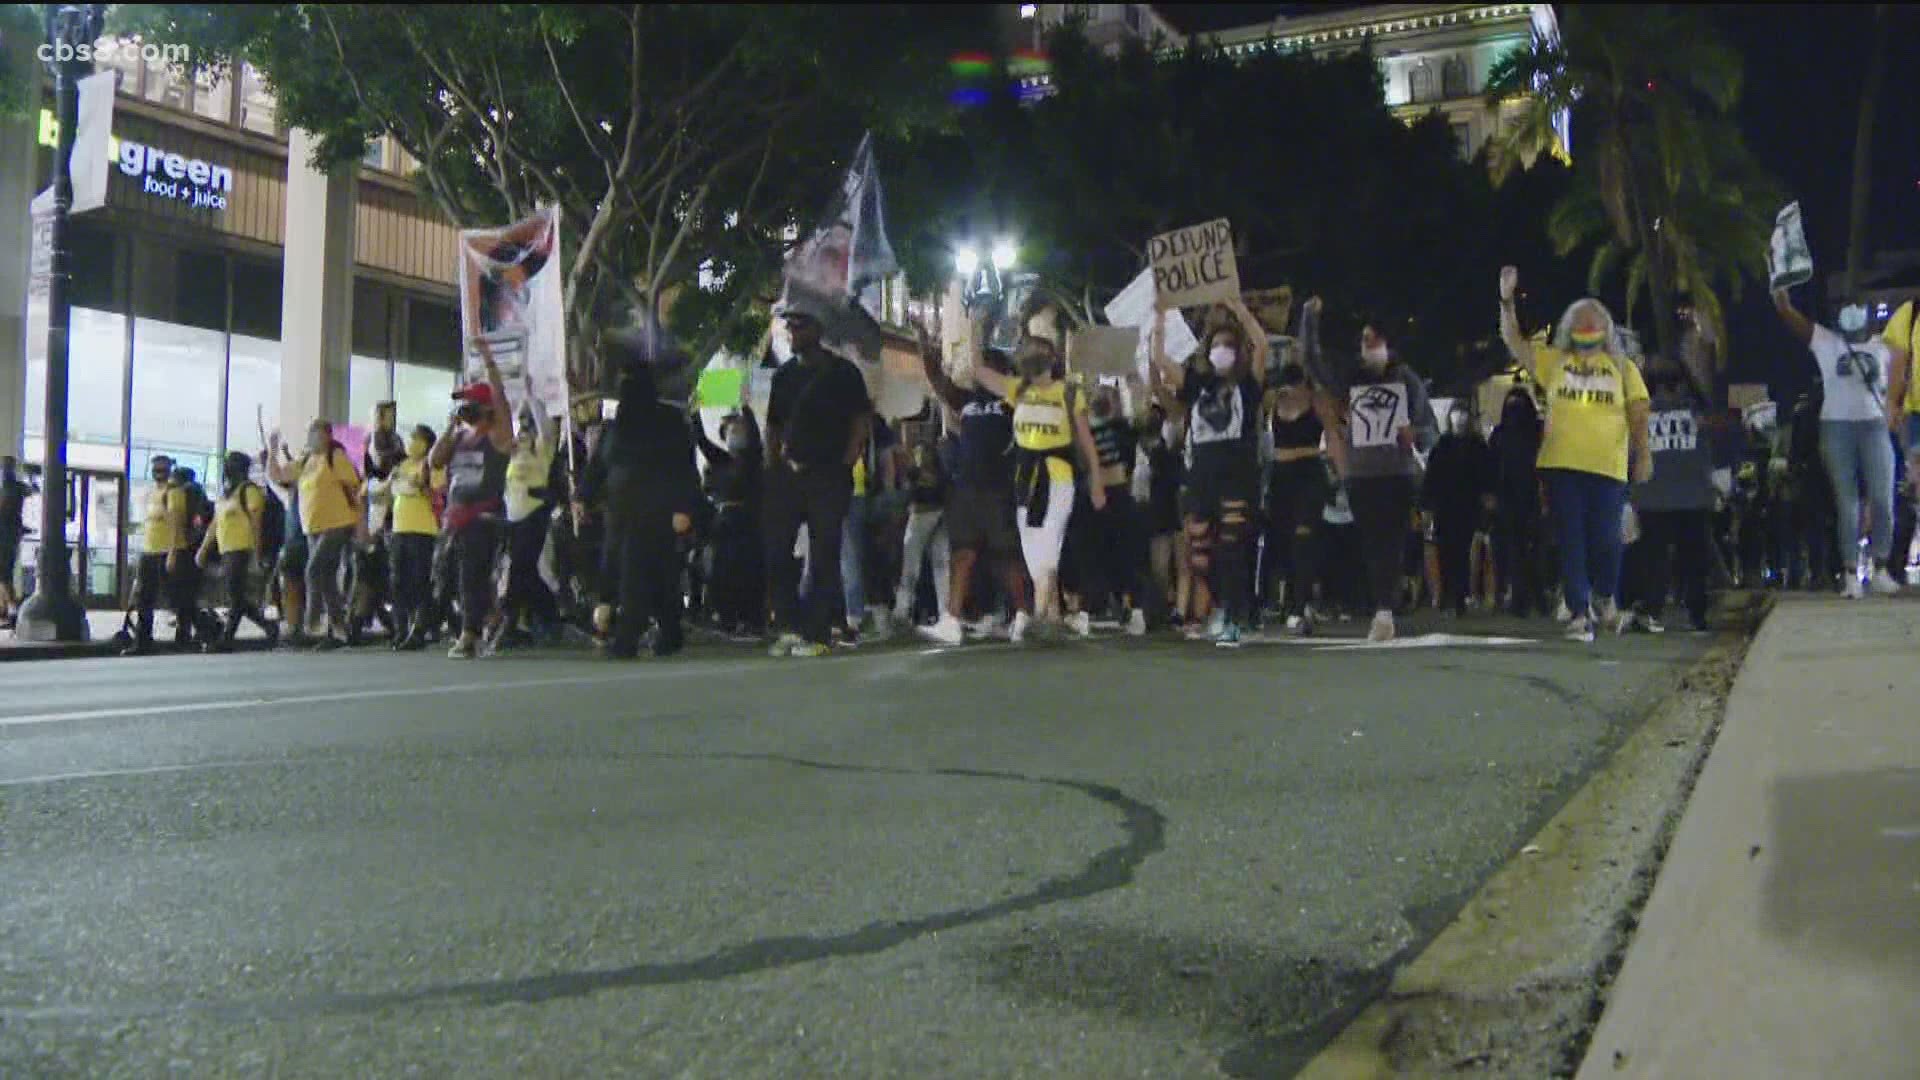 Most protesters dispersed Wednesday night around 9:15 p.m. saying they will come back each night at 8 p.m. to the area of 8th Avenue and B Street.